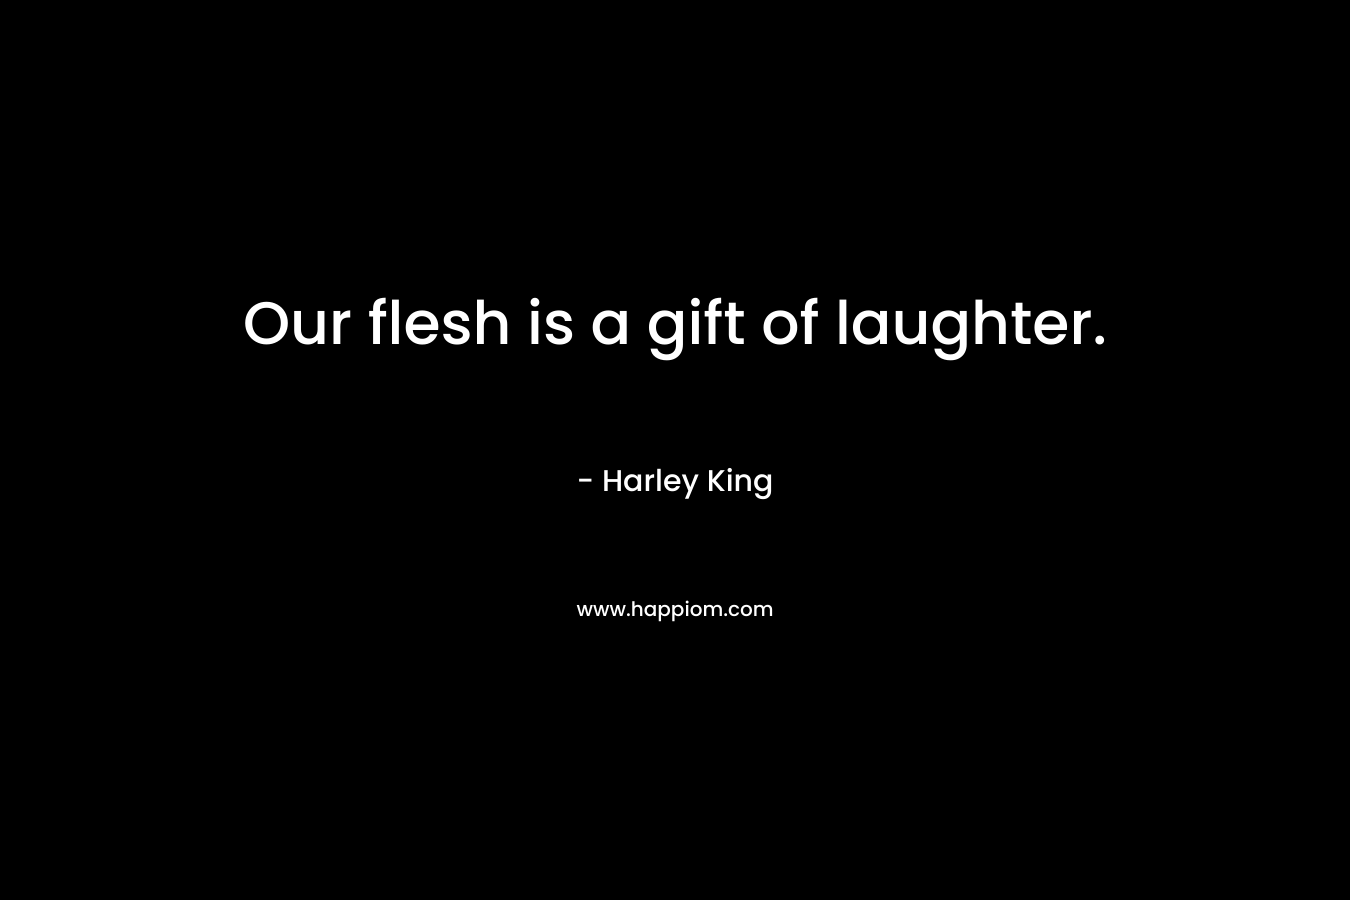 Our flesh is a gift of laughter. – Harley King